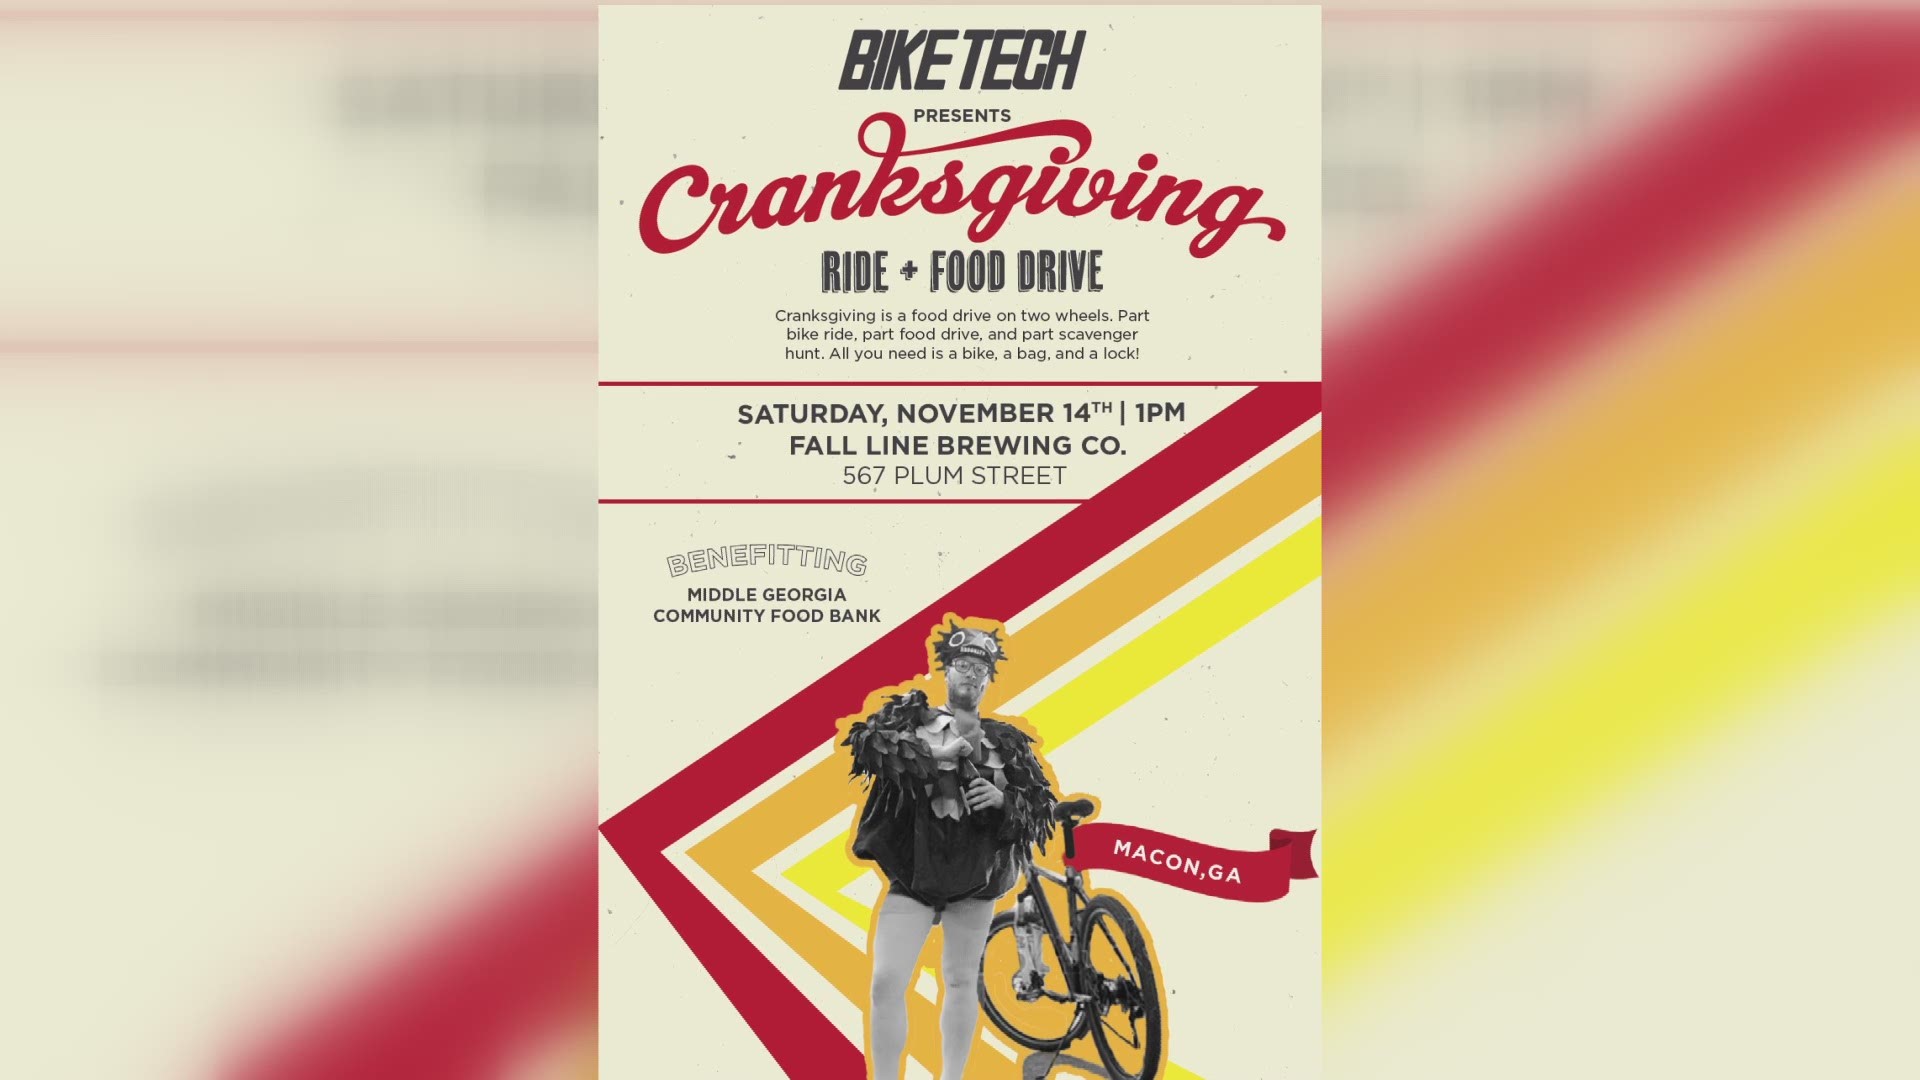 Cranksgiving is a nationwide event. Bike Tech Macon and Fall Line Brewing Company will host it for the first time in Macon.